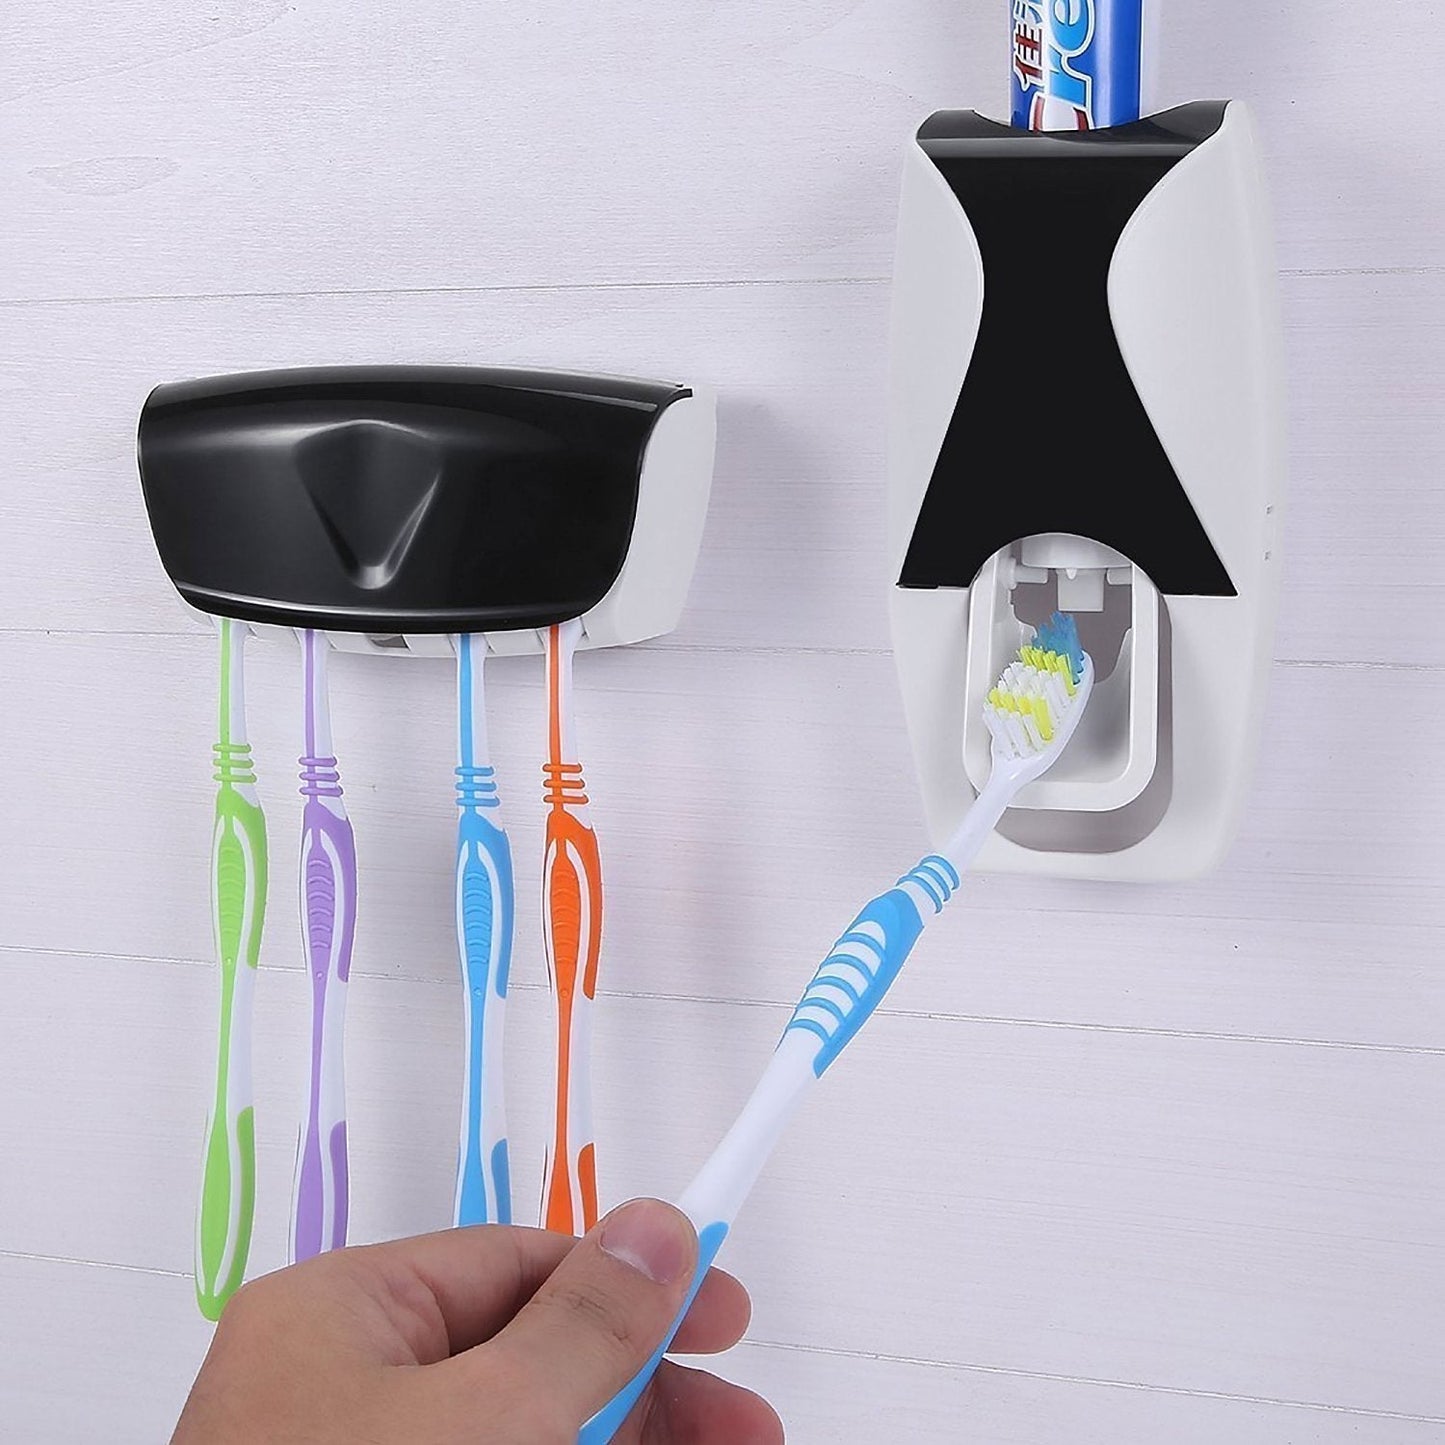 200 Toothpaste Dispenser & Tooth Brush with Toothbrush 